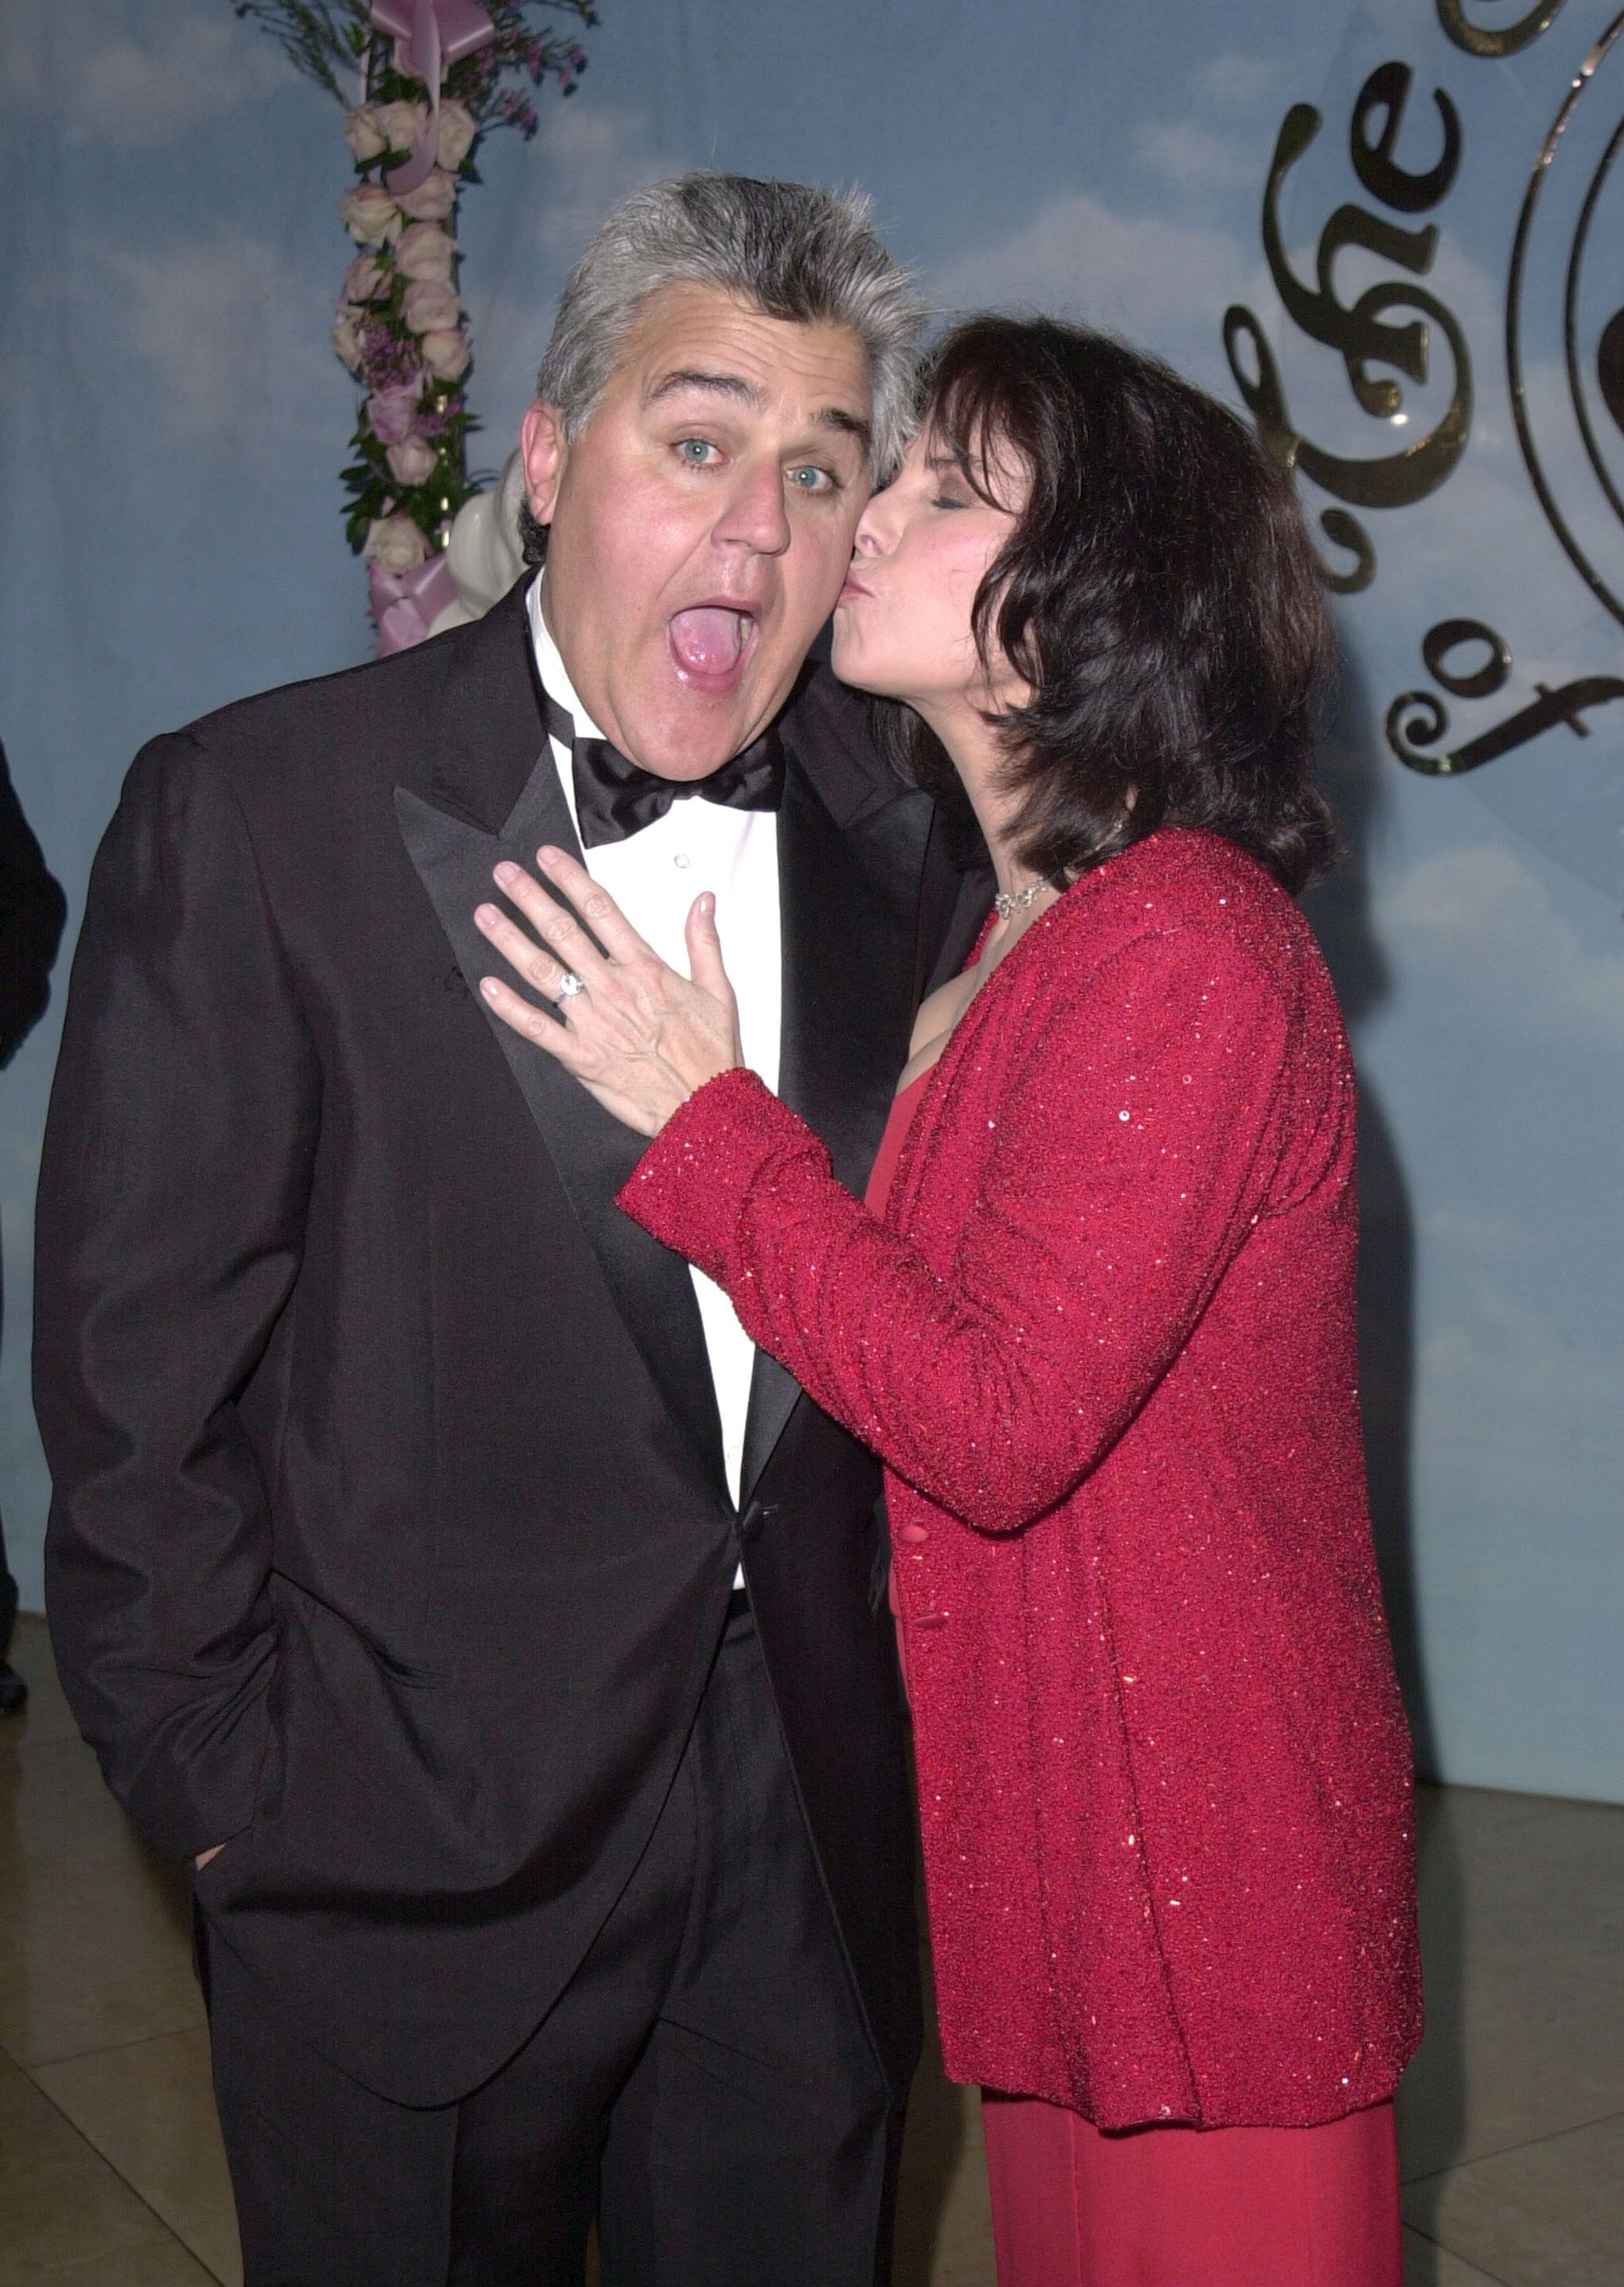 Jay and Mavis Leno during the 14th Carousel of Hope Ball for Barbara Davis Center for Diabetes in Beverly Hills, California, on October 28, 2000. | Source: Getty Images